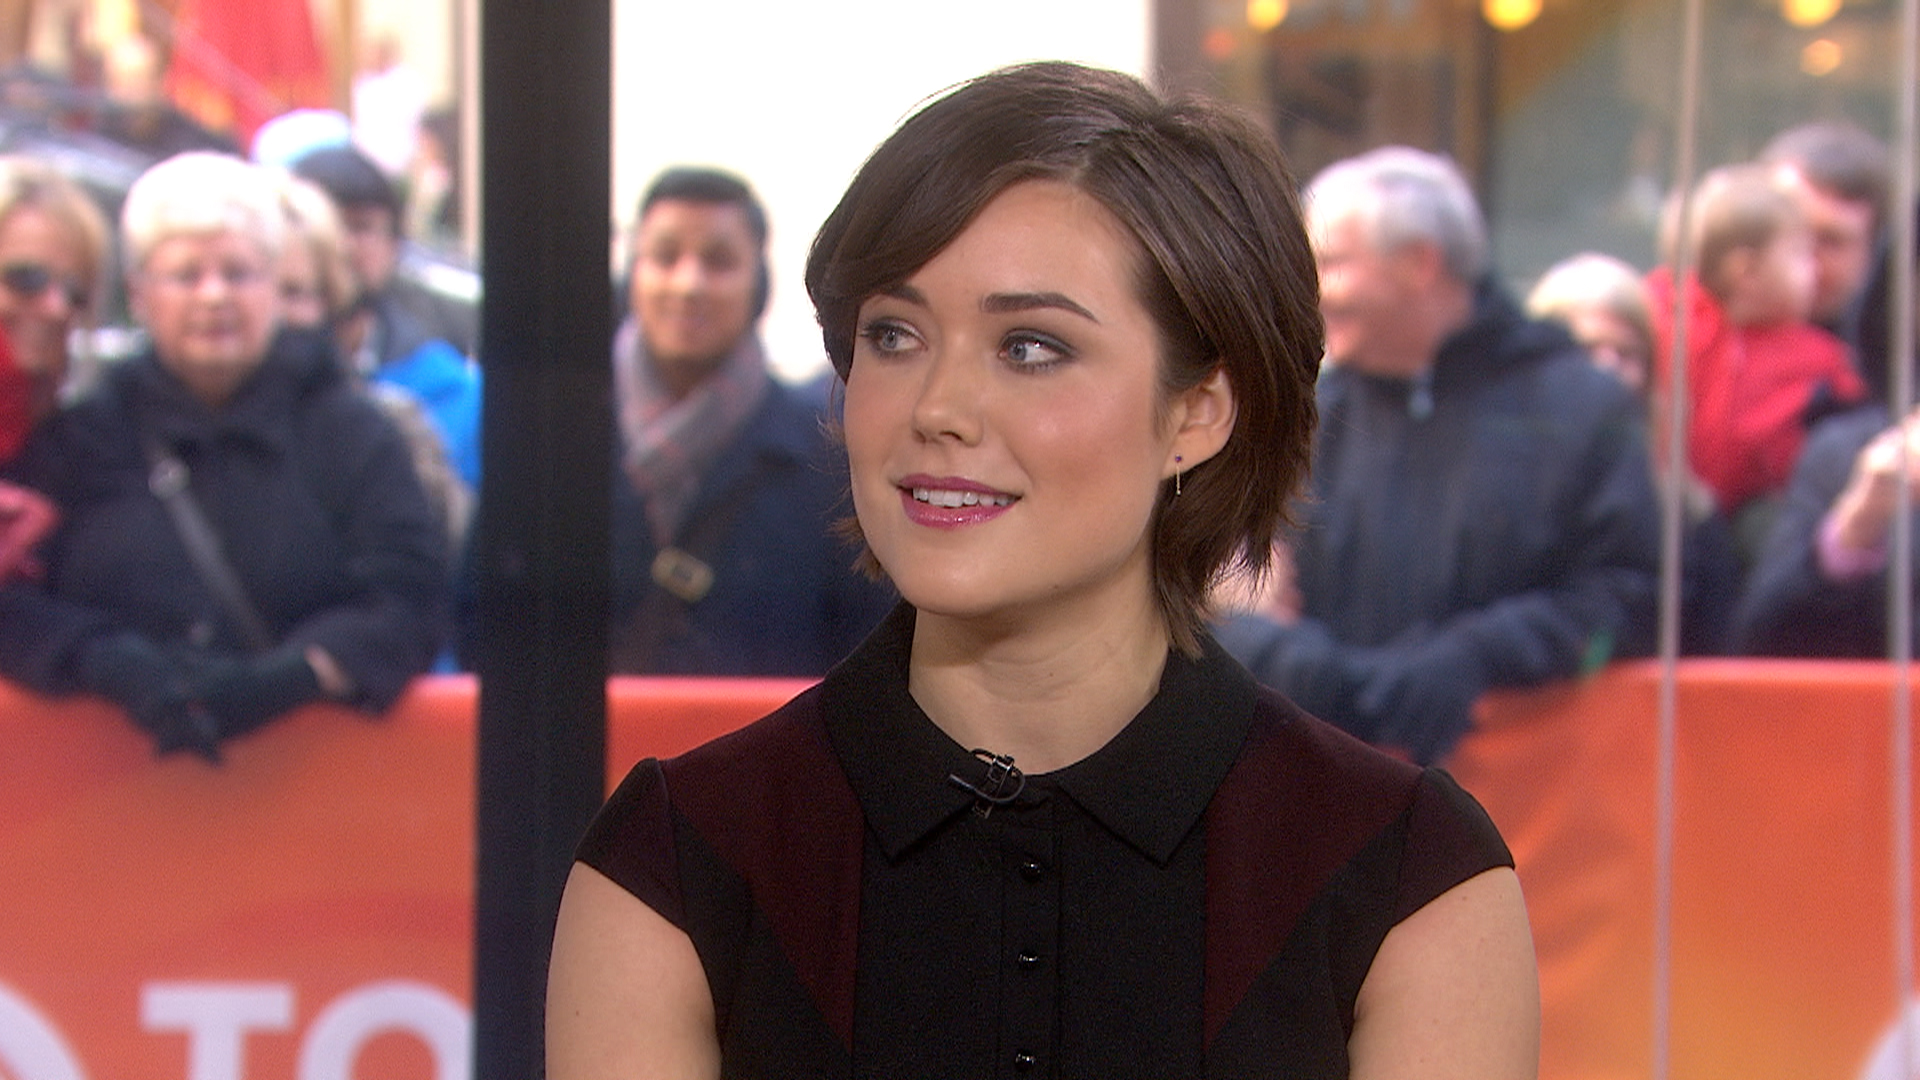 Blacklist Star Megan Boone Deals With Hairy Situations On Screen